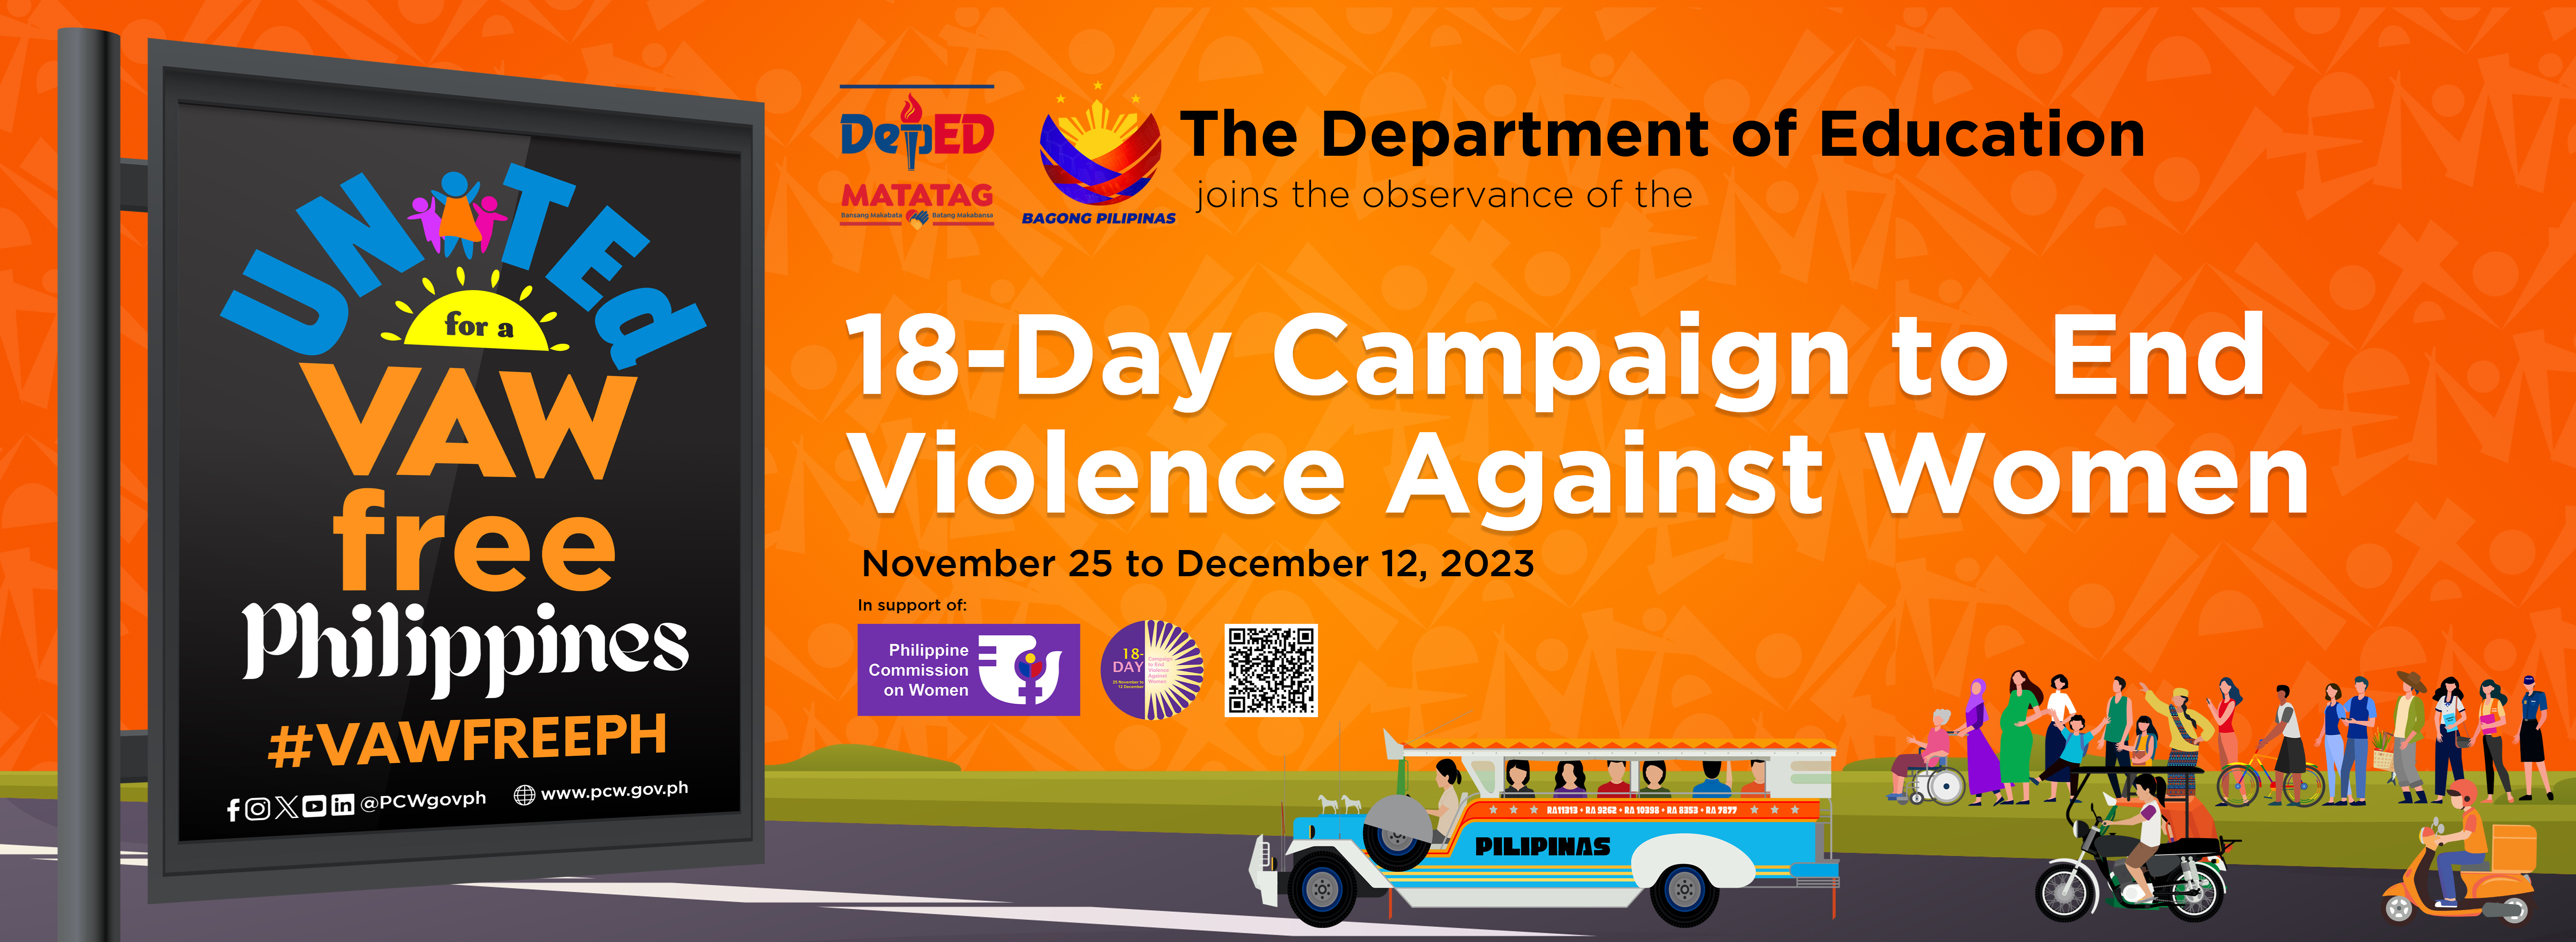 https://www.deped.gov.ph/wp-content/uploads/Copy-of-2023-18-Day-Campaign-Streamer.png